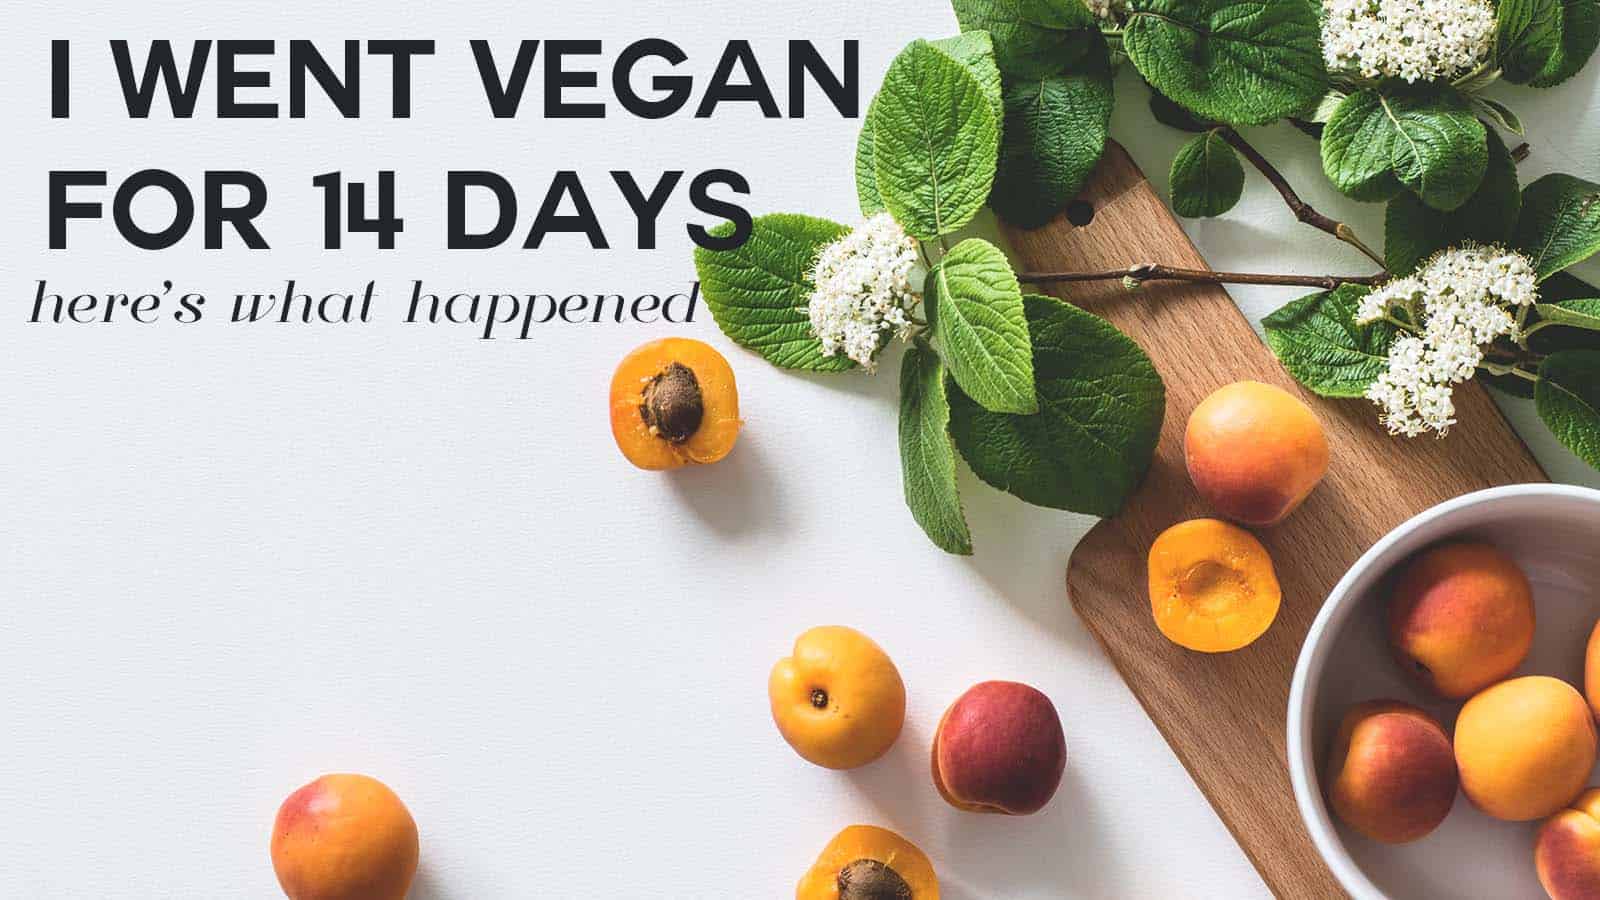 I tried being vegan for 14 days: Here’s what happened